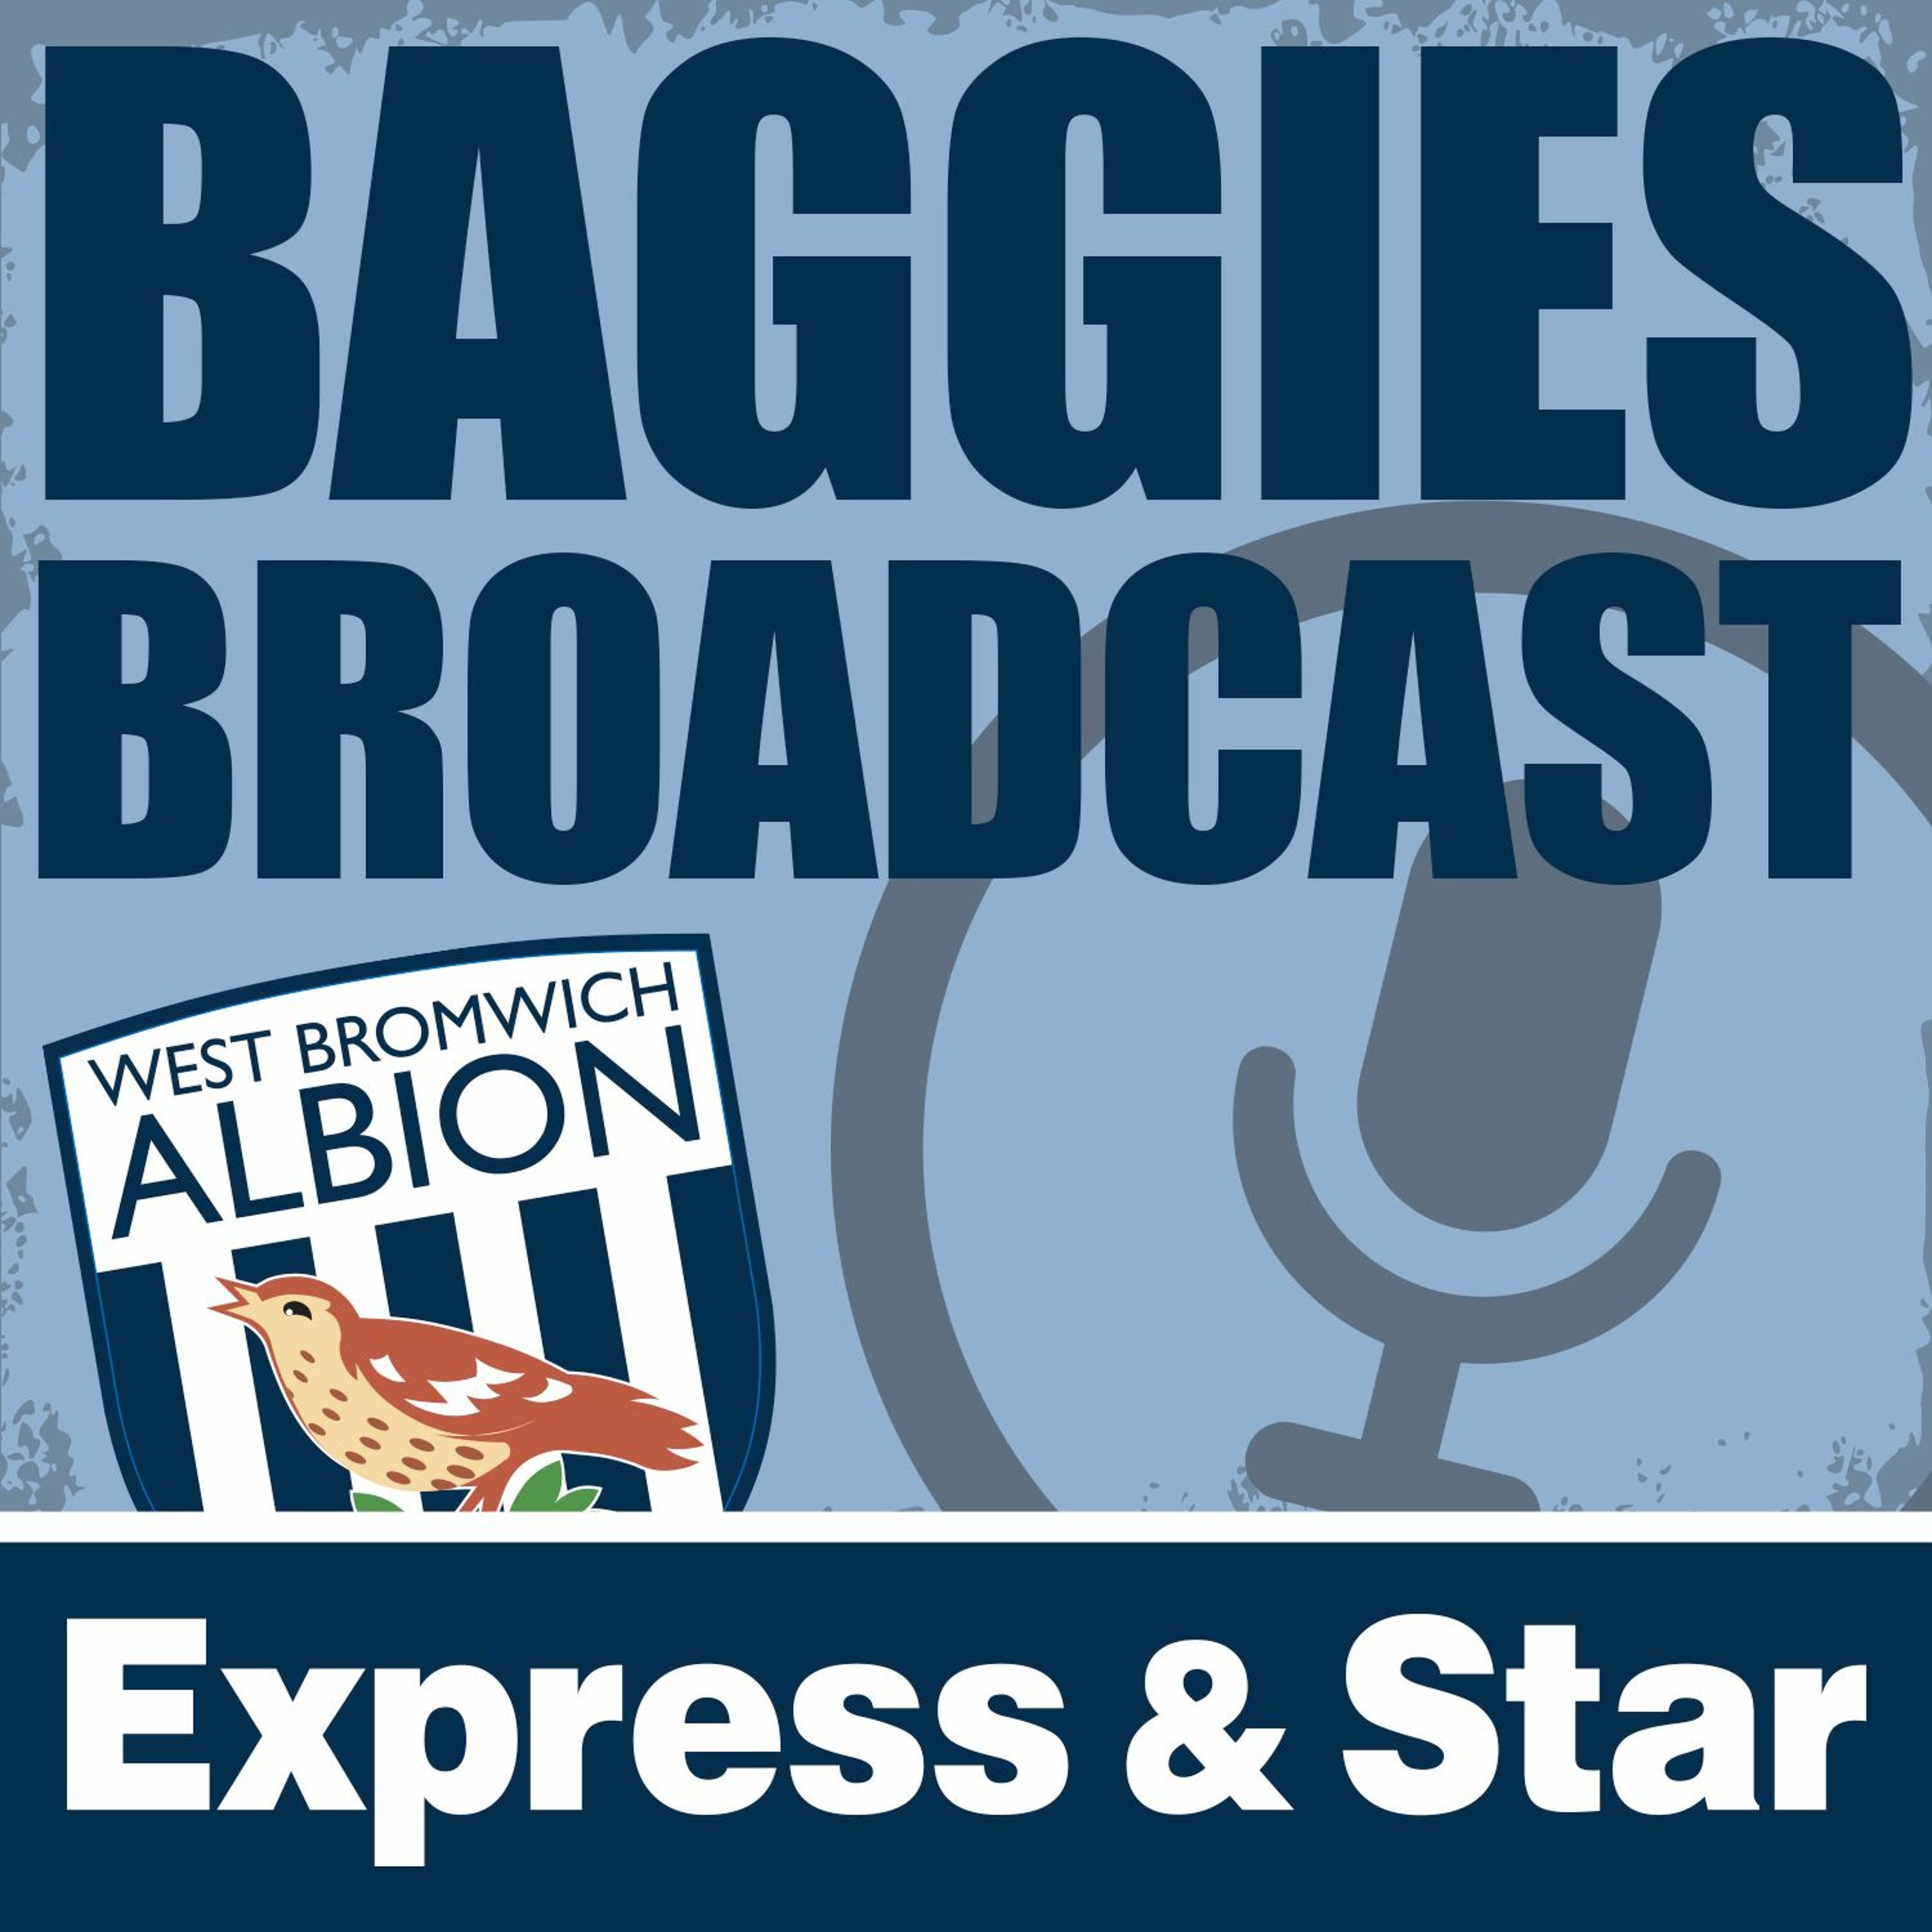 Season 2 Episode 3: West Bromwich Albion - The entertainers!